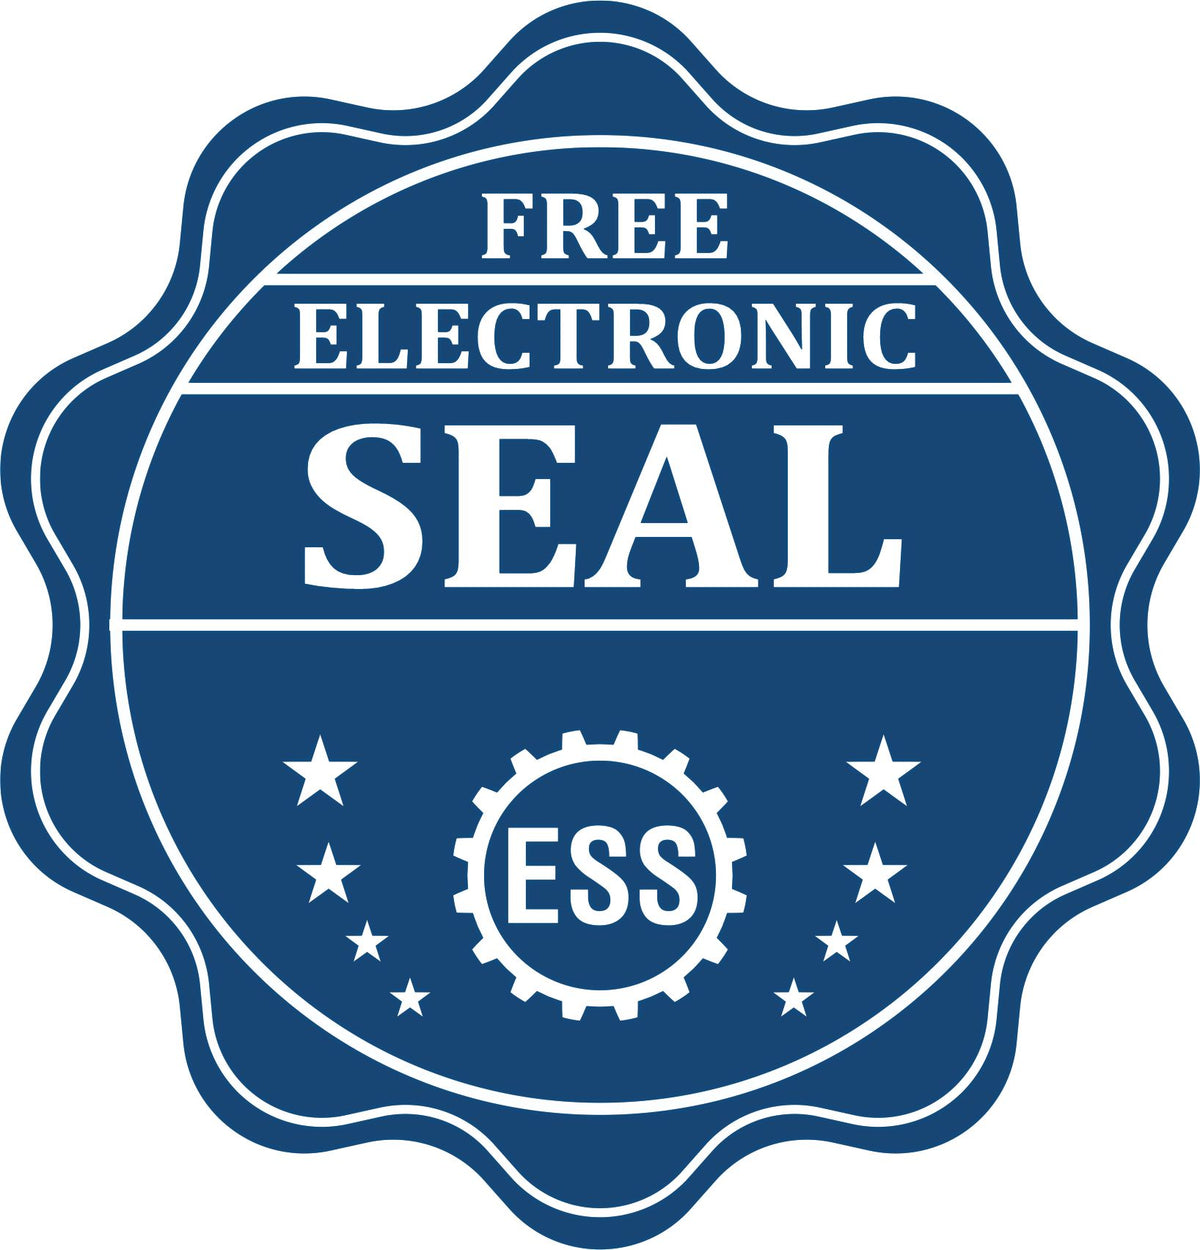 A badge showing a free electronic seal for the Kansas Engineer Desk Seal with stars and the ESS gear on the emblem.